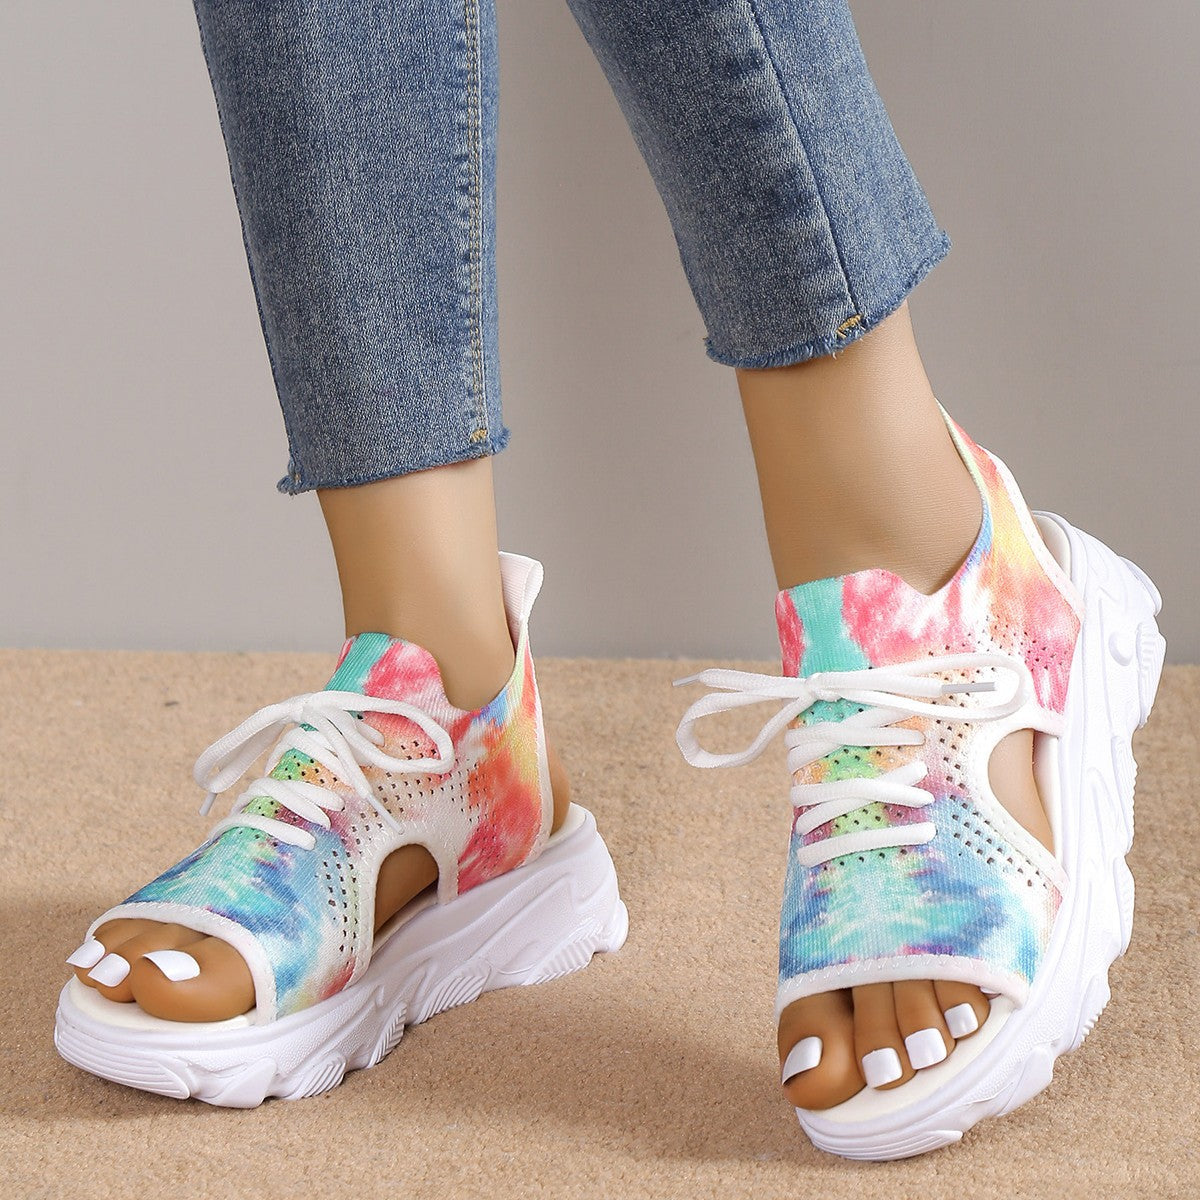 sandals  | Print Lace-up Sports Sandals Summer Peep Toe Casual Mesh Shoes | Flower |  35.| thecurvestory.myshopify.com